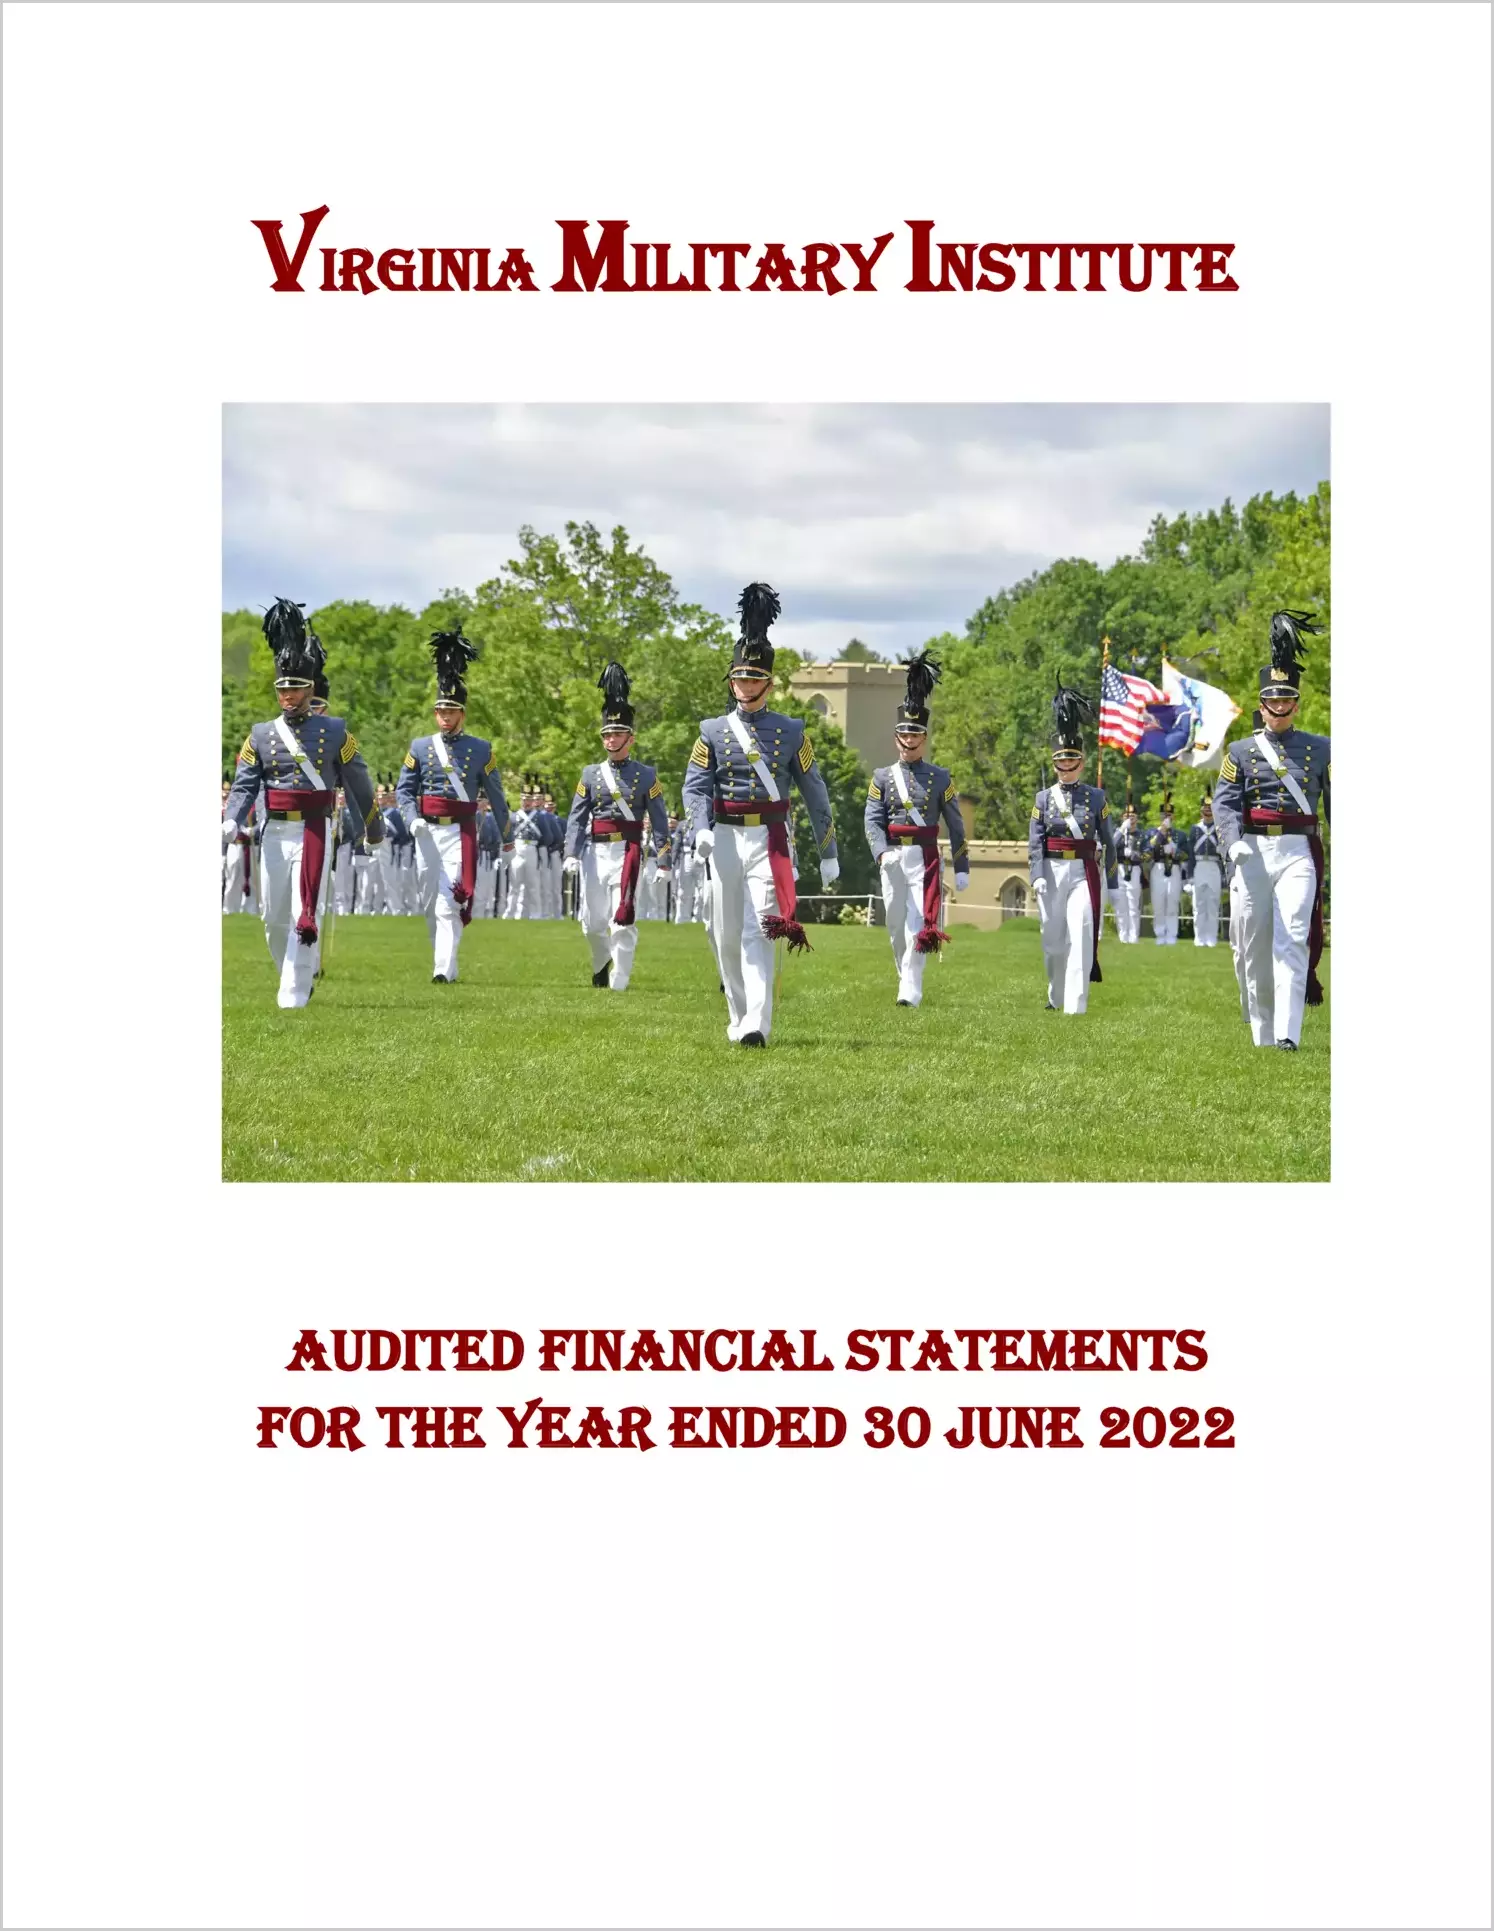 Virginia Military Institute Financial Statements for the year ended June 30, 2022